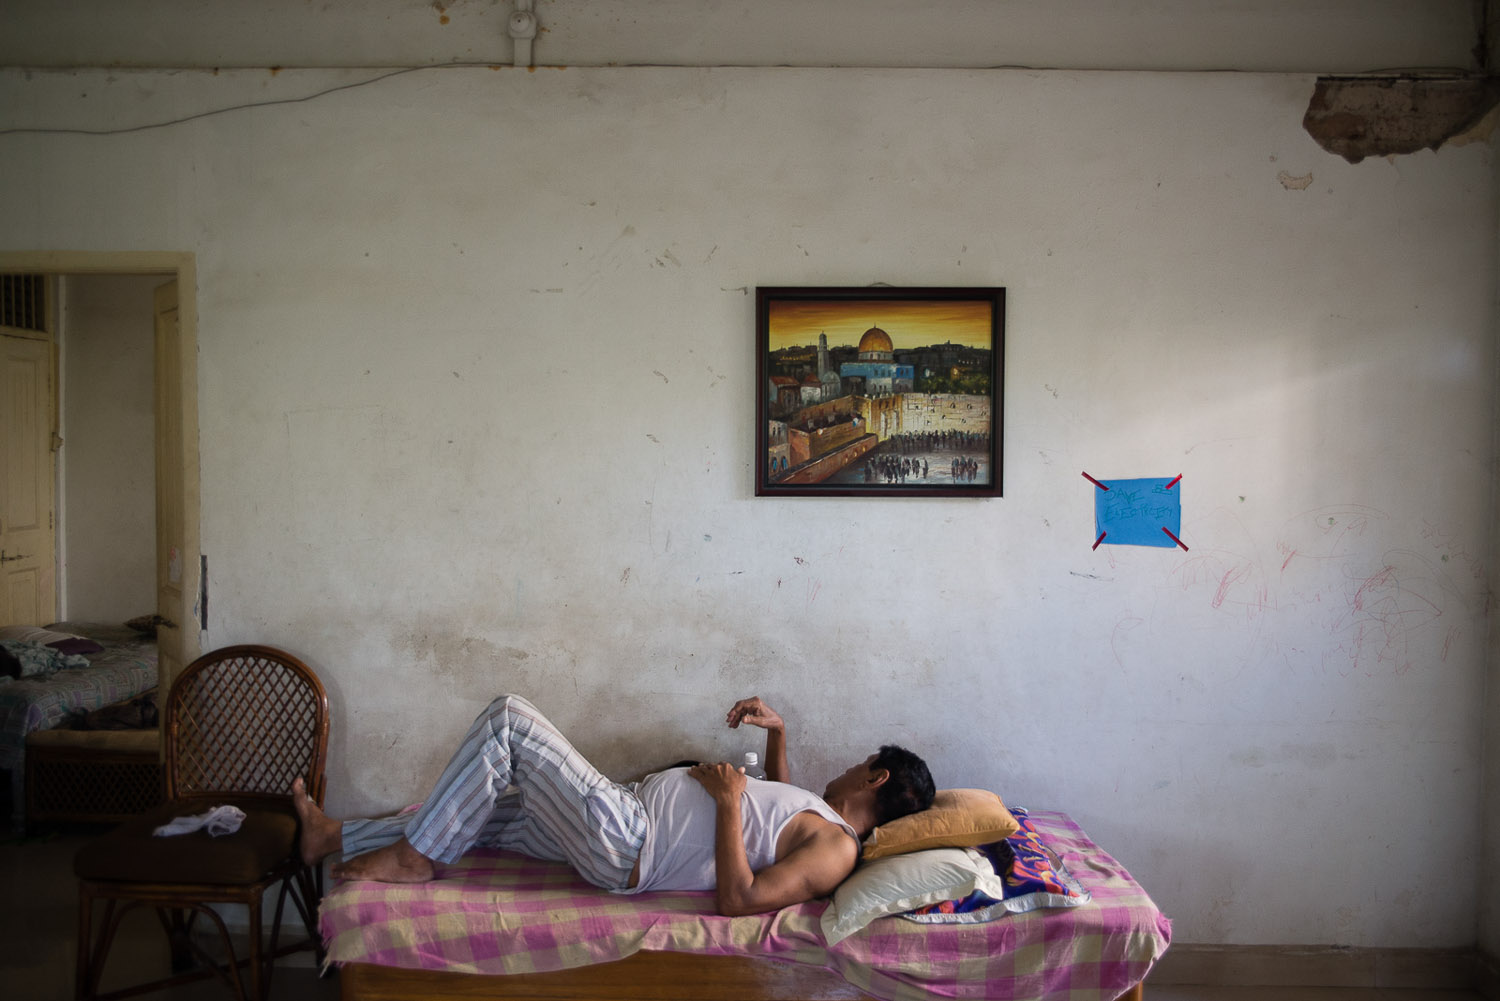  Benjamin Reuben Galsurkar takes a nap under a painting of Jerusalem in the hostel the Galsurkar family owns. The hostel was once a place to house refugees fleeing the Nazis during World War II, and then became a hostel to house Jewish students comin